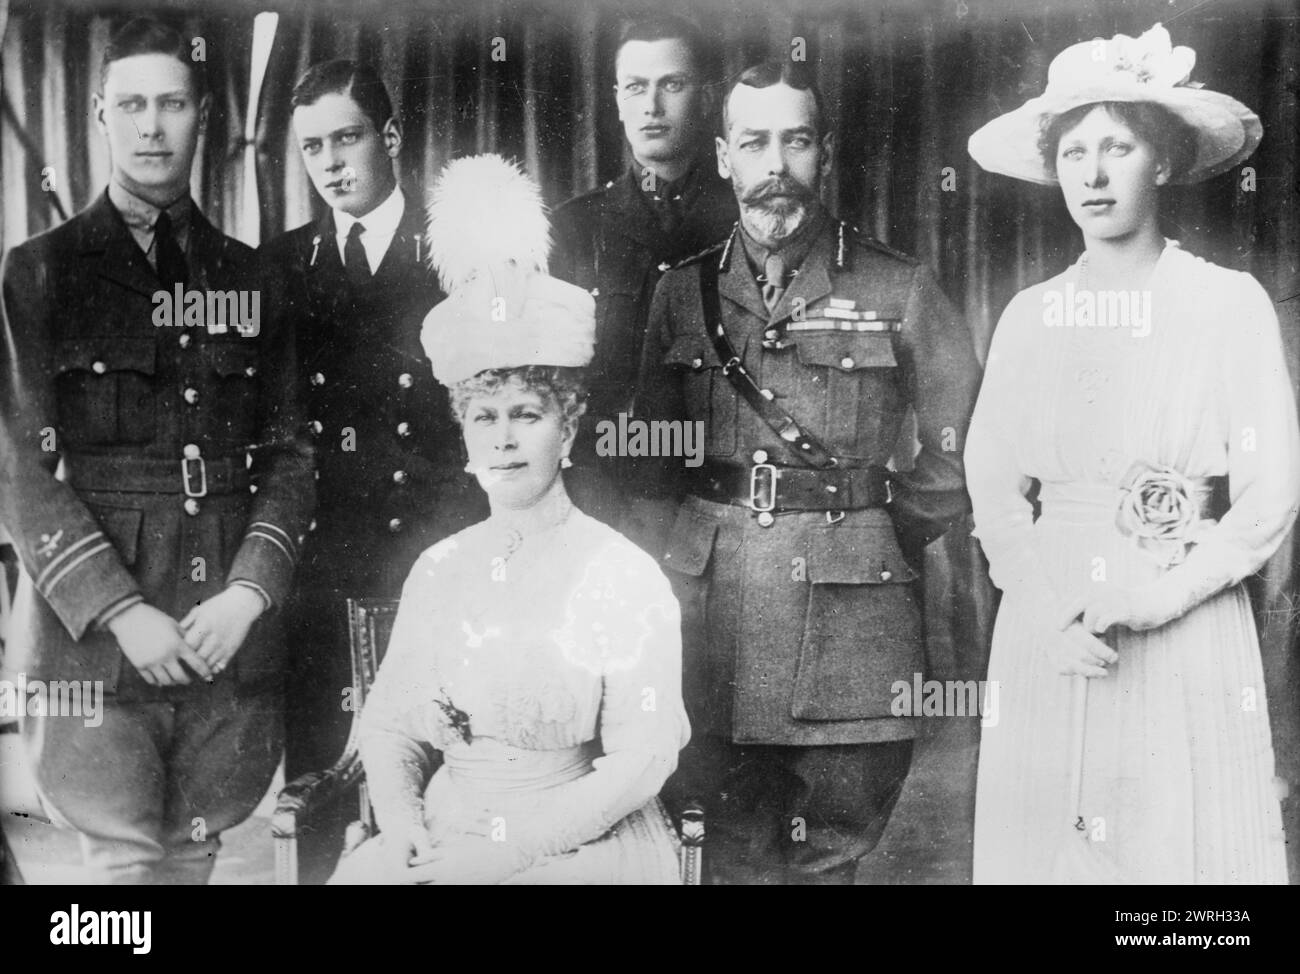 British royal family, between c1915 and c1920. Shows members of the British royal family including: (left to right) Albert (later George VI), George, Duke of Kent; Queen Mary of Teck, Henry, Duke of Gloucester; King George V, Princess Mary. Stock Photo